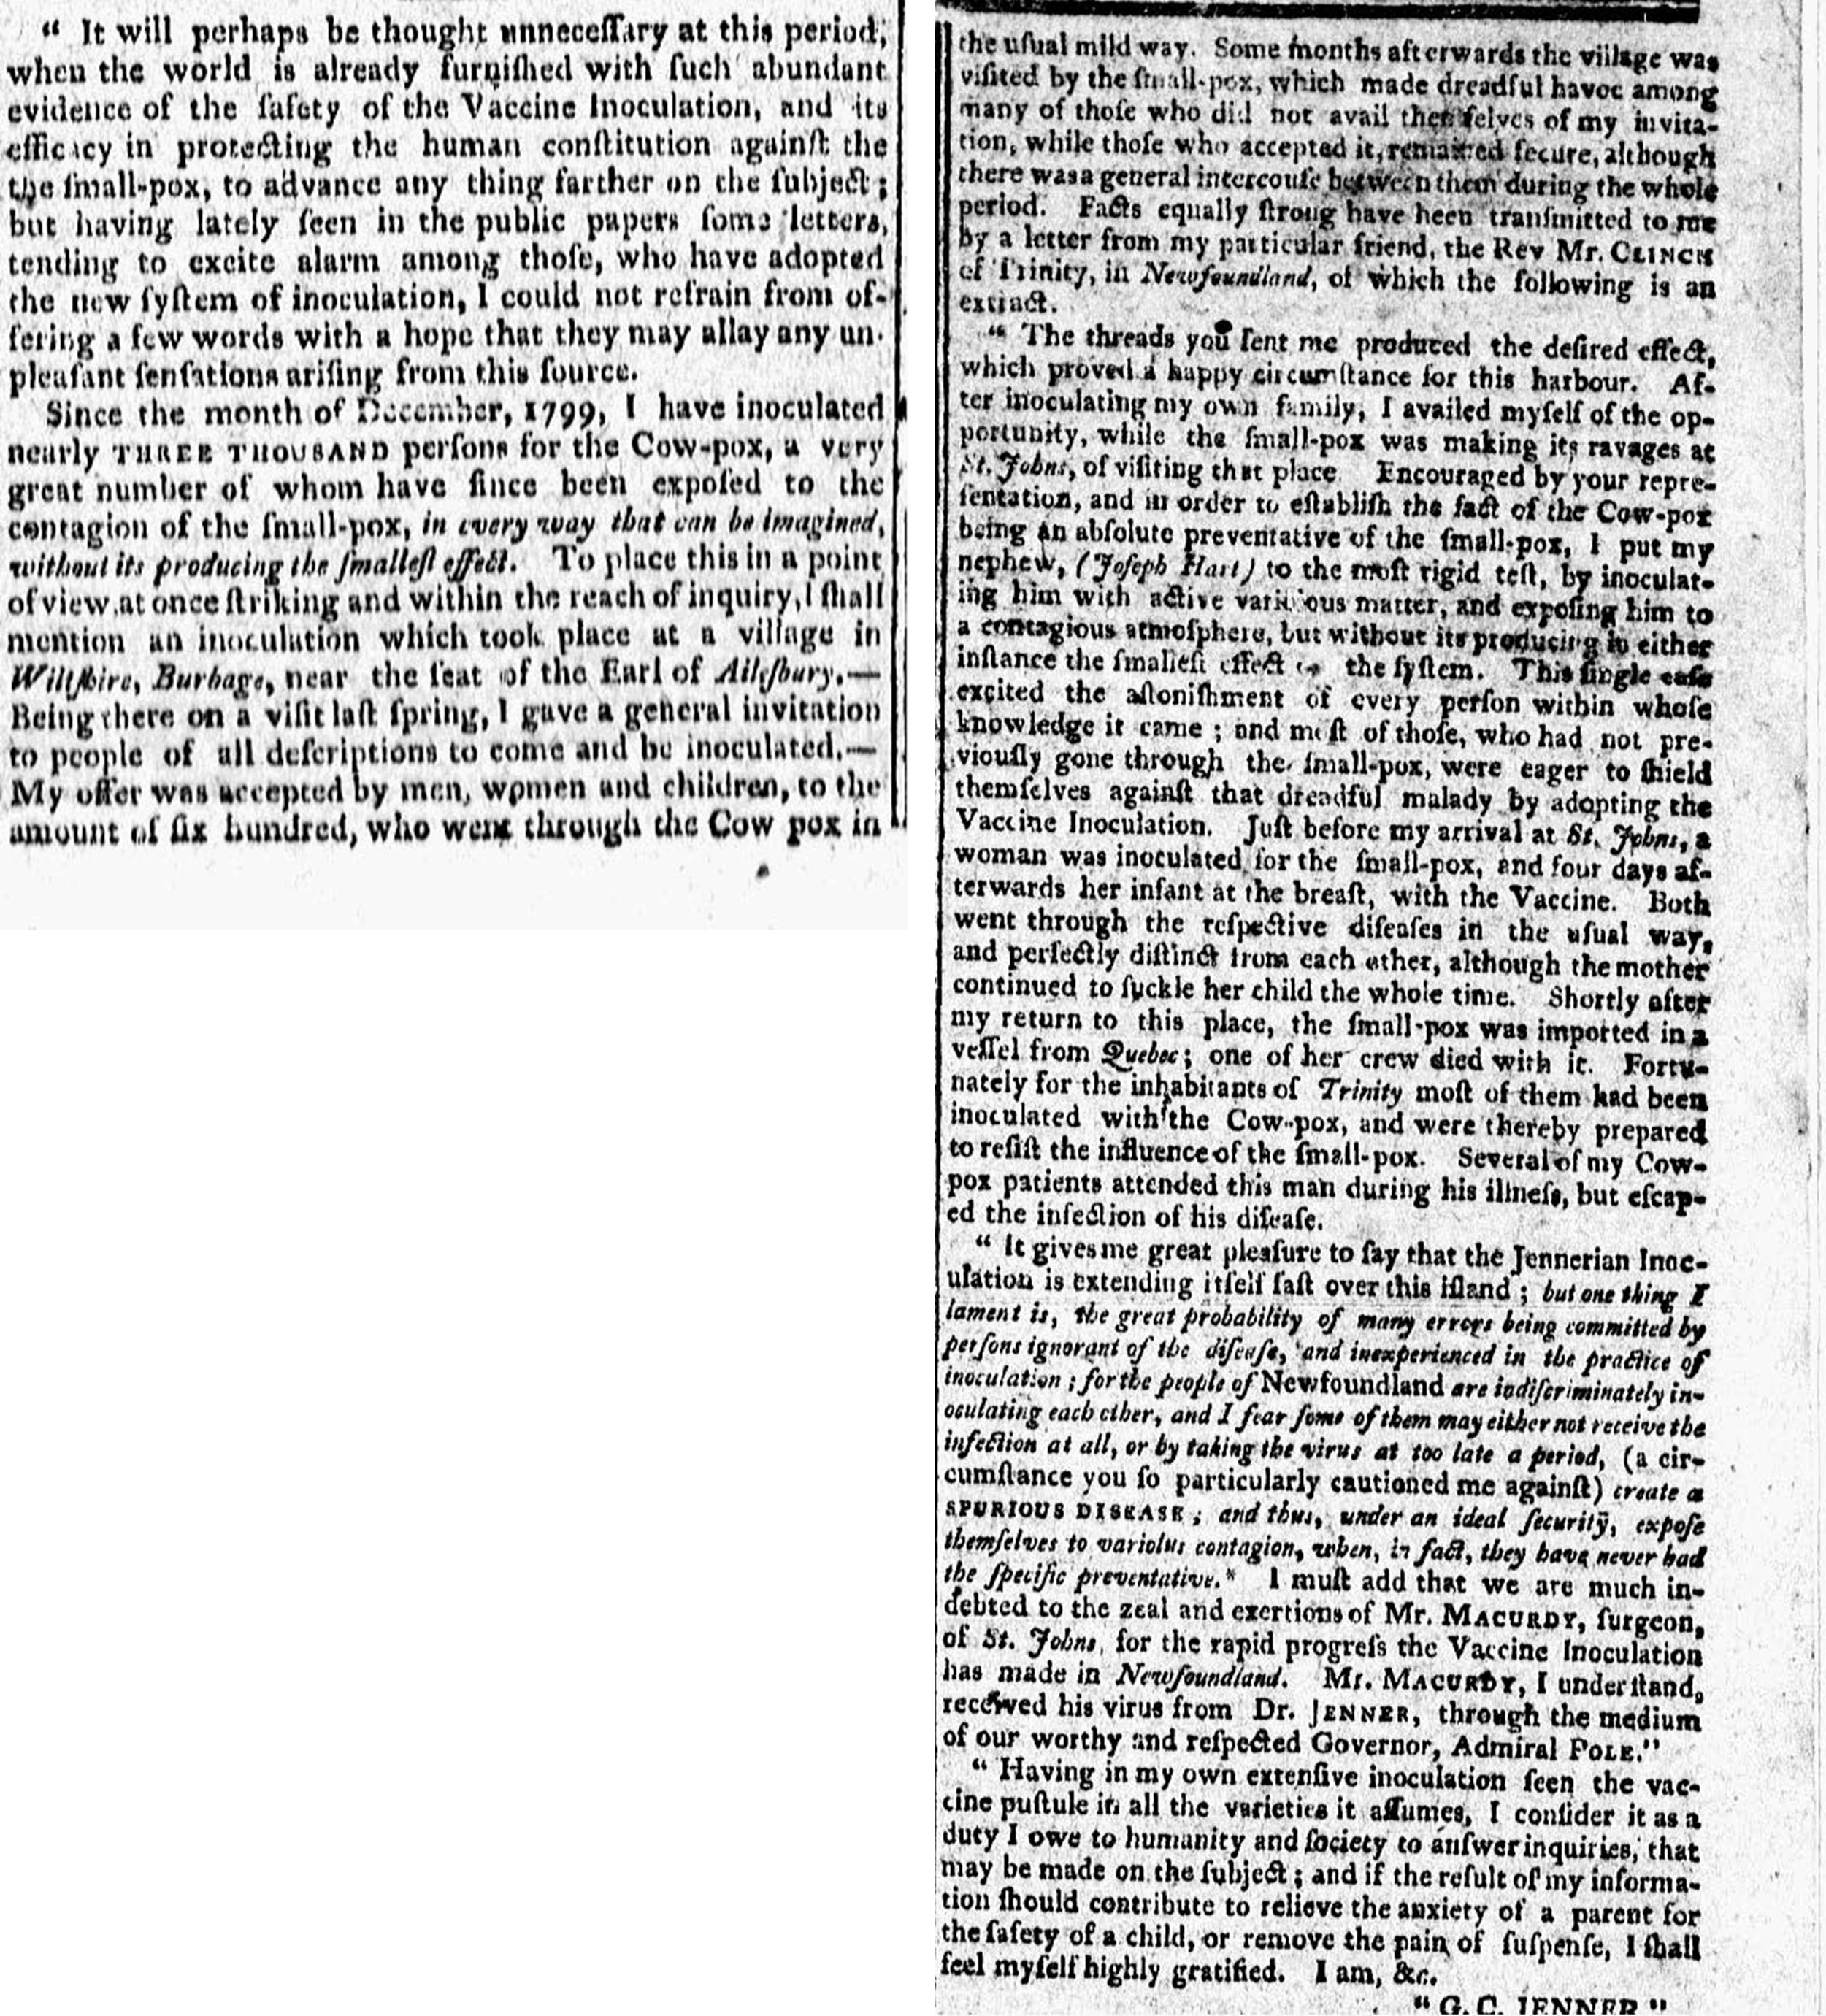 Columbian Centinel. Massachusetts Federalist. August 12,1801. From Early American Newspapers, 1620-1922.